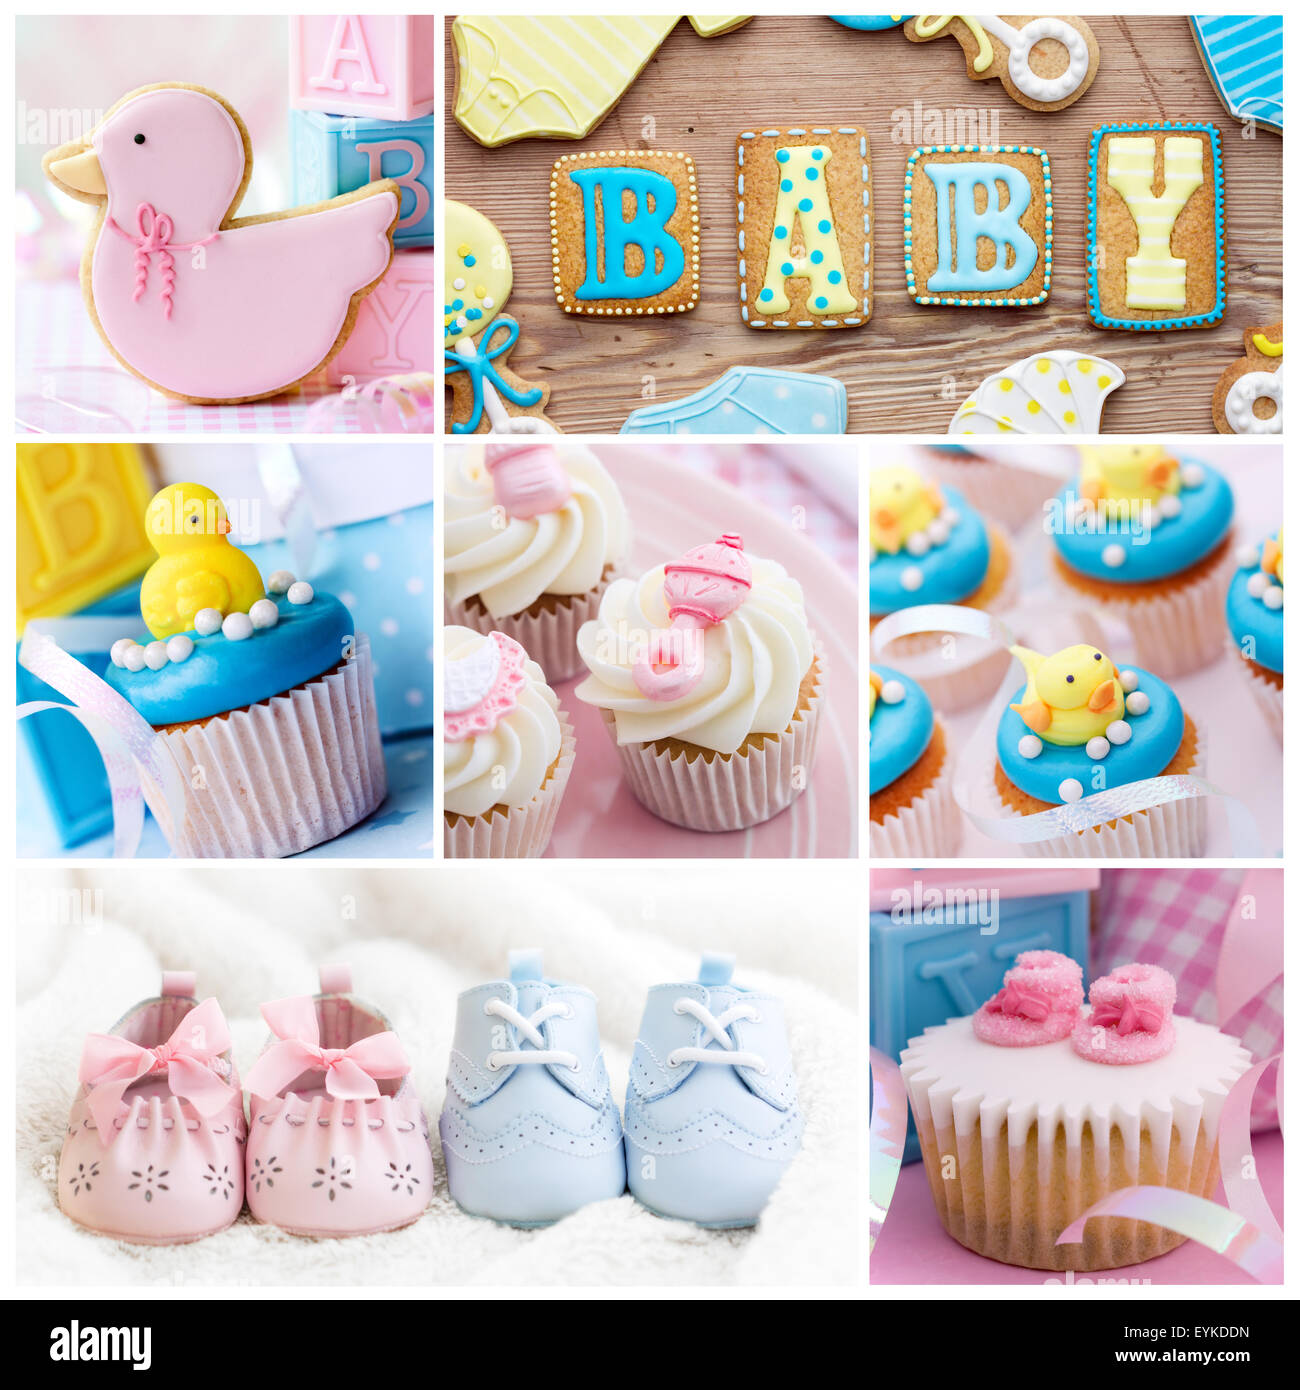 Collection of baby shower images Stock Photo